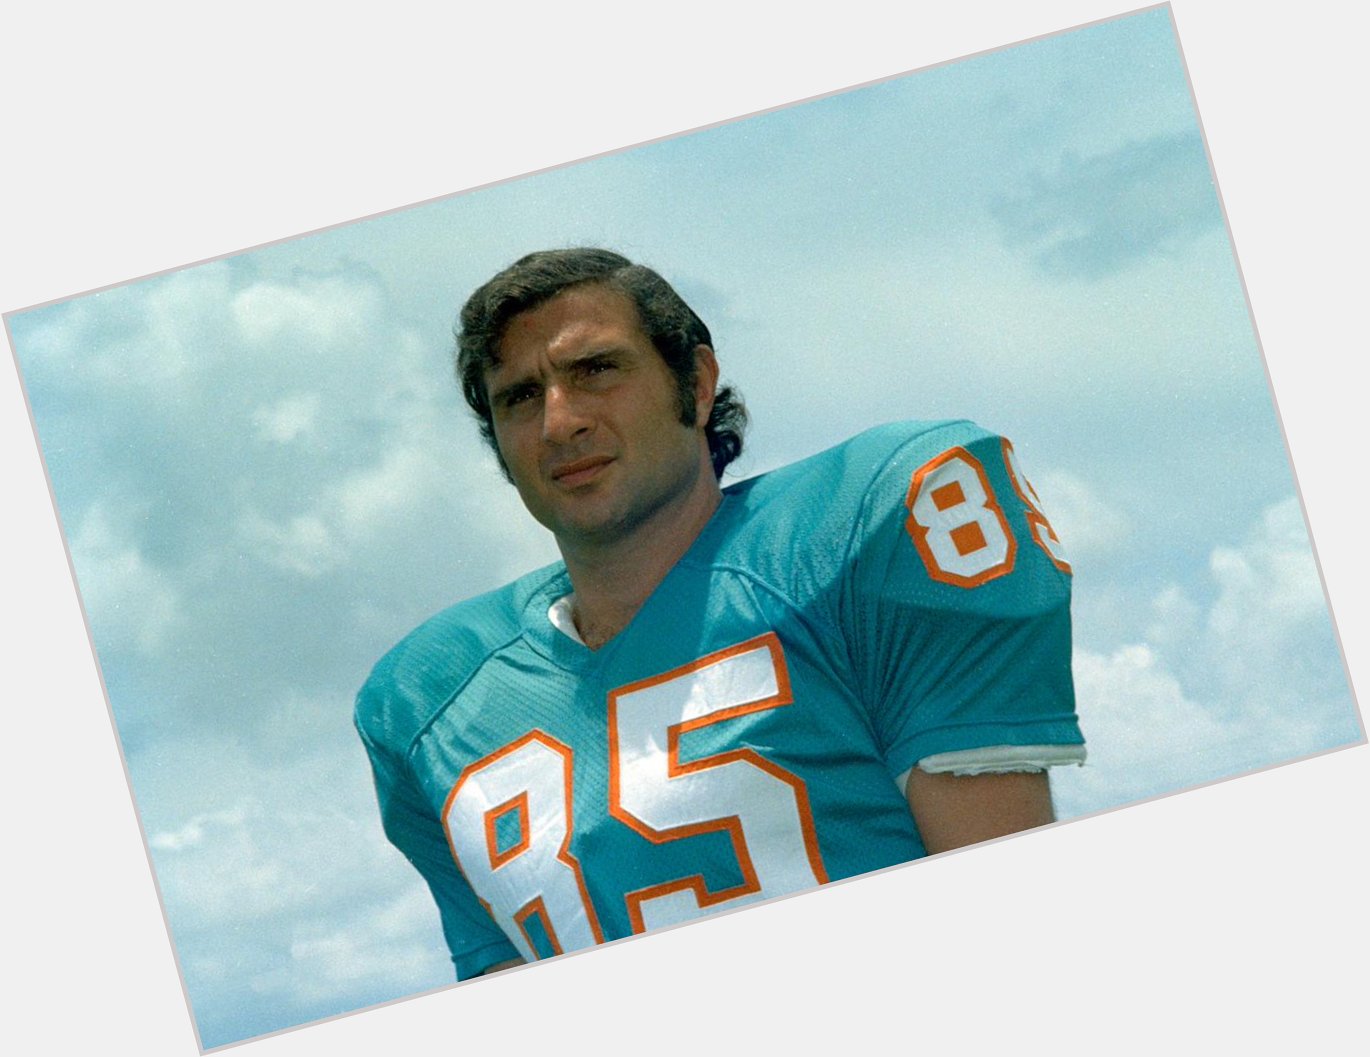 Happy BDay to our lifetime member and Hall of Famer Nick Buoniconti! 